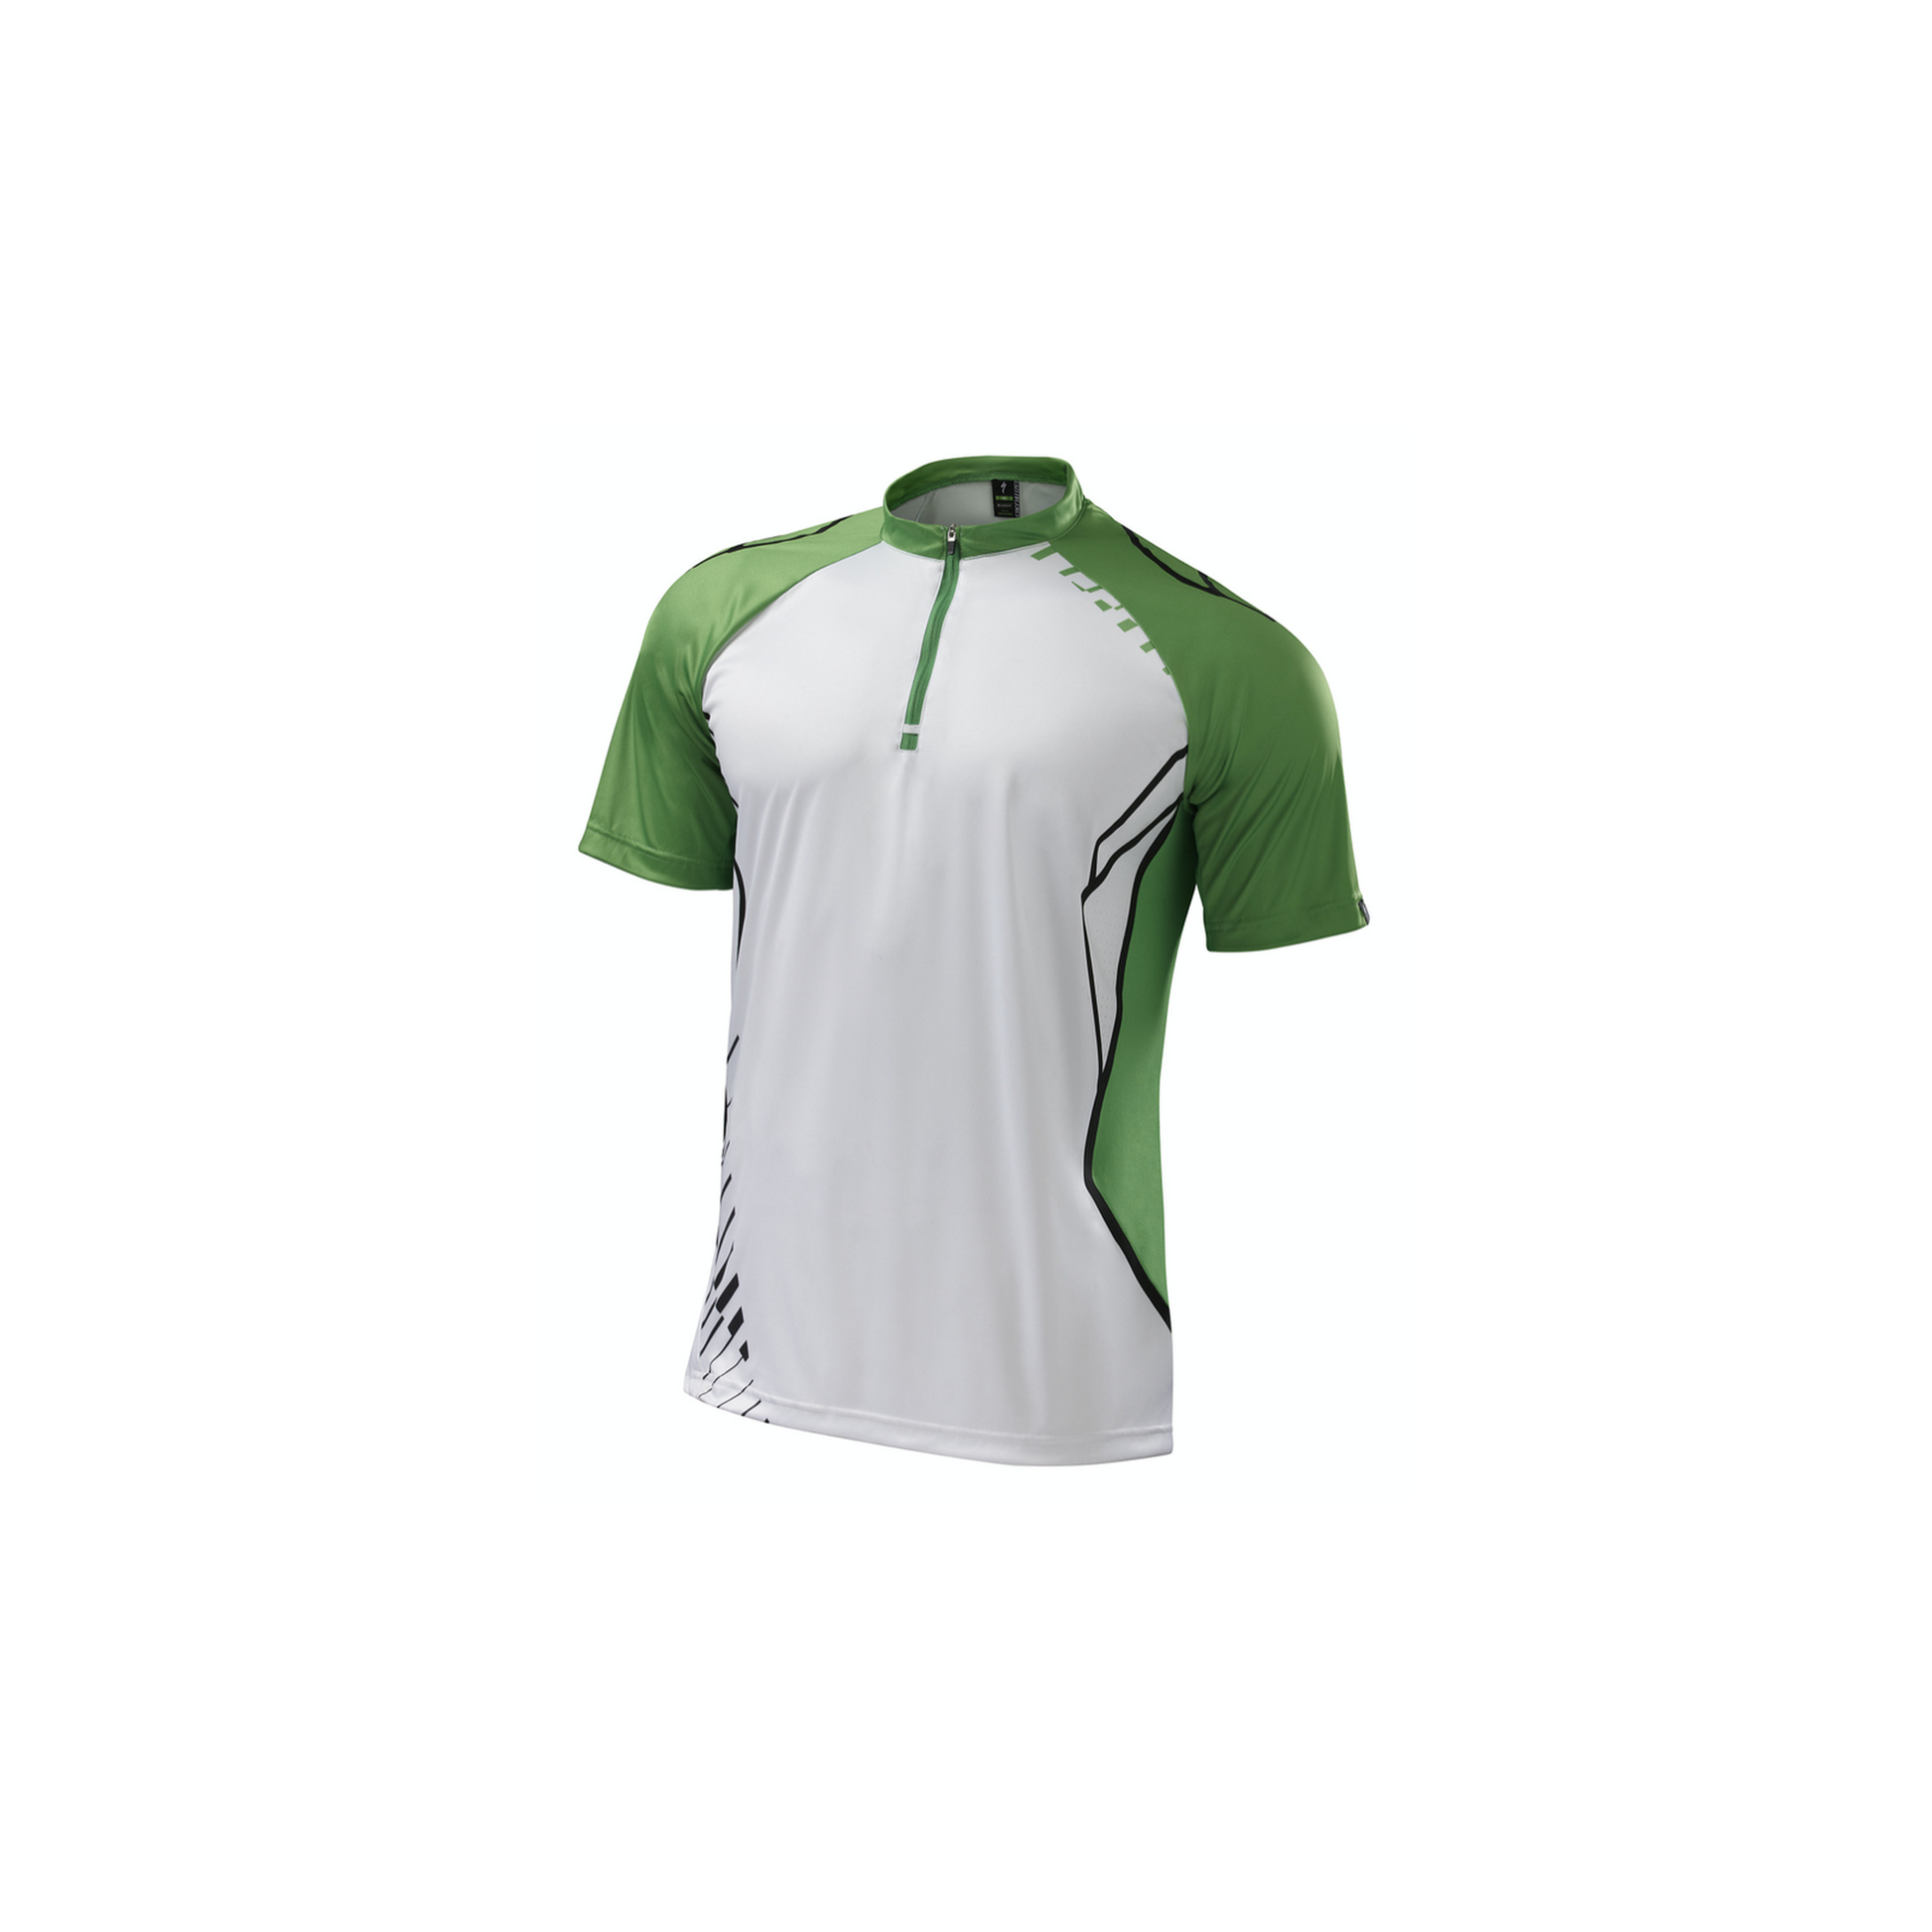 ATLAS XC PRO JERSEY SS WHT/MOTO GRN L-Cycles Direct Specialized